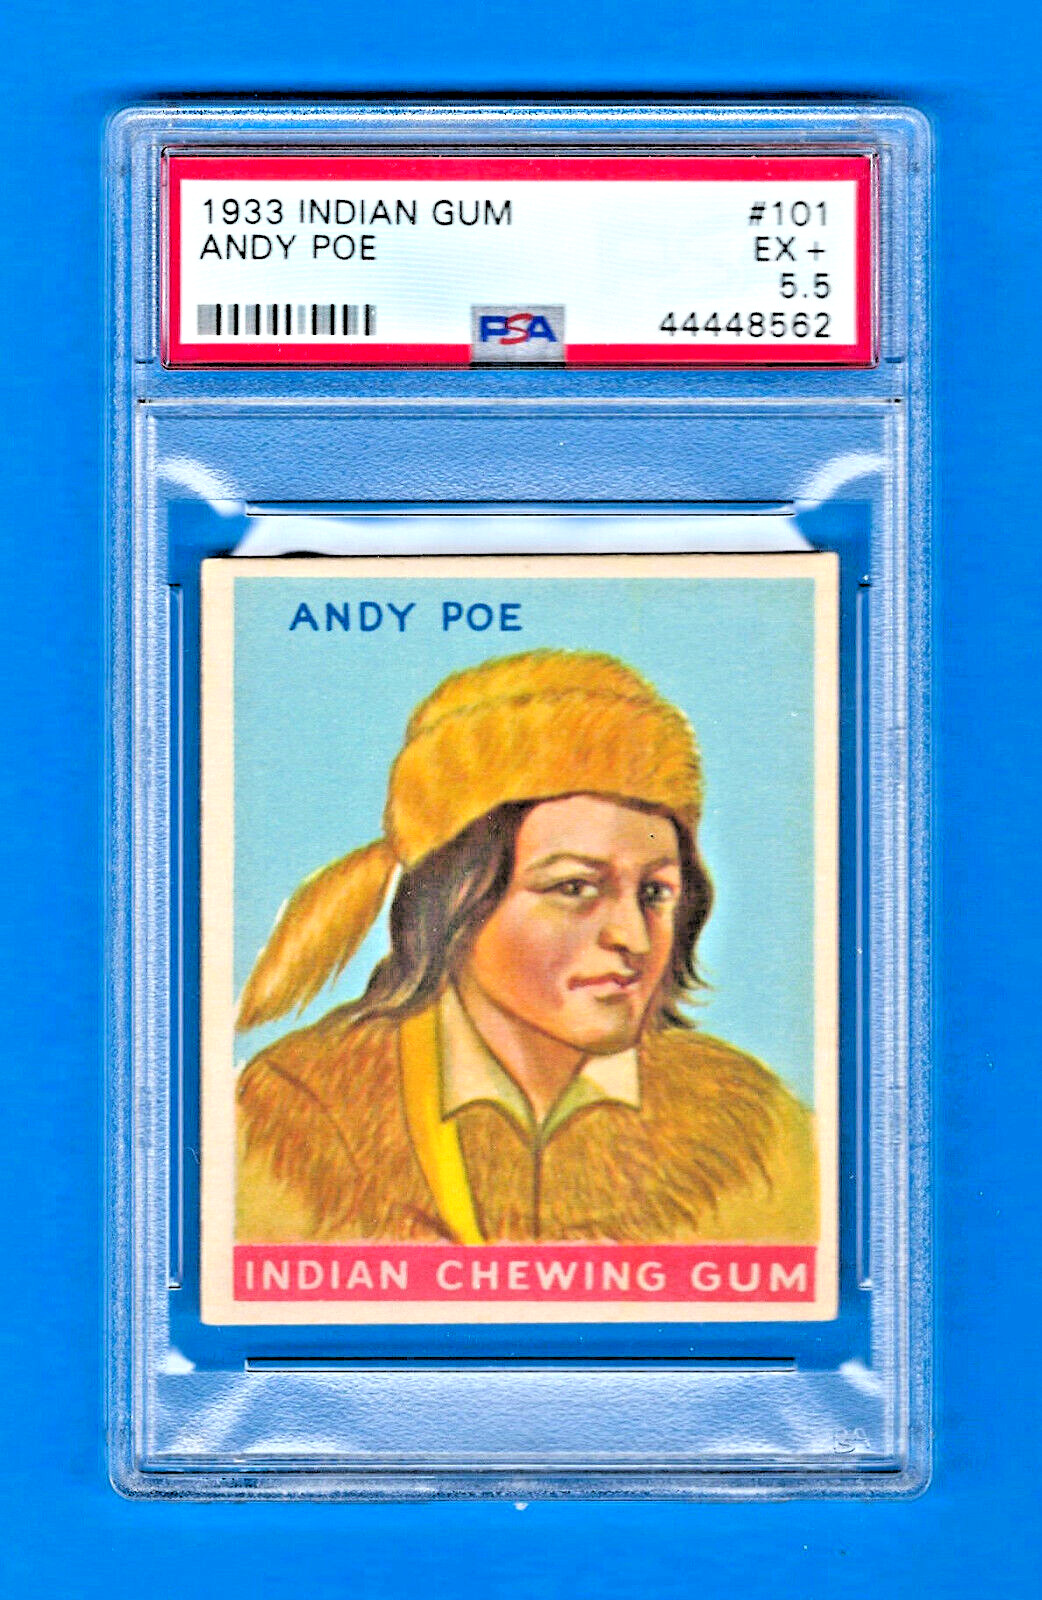 1933 R73 Goudey Indian Gum Card  #101 - ANDY POE - Series of 192 - PSA 5.5 - EX+